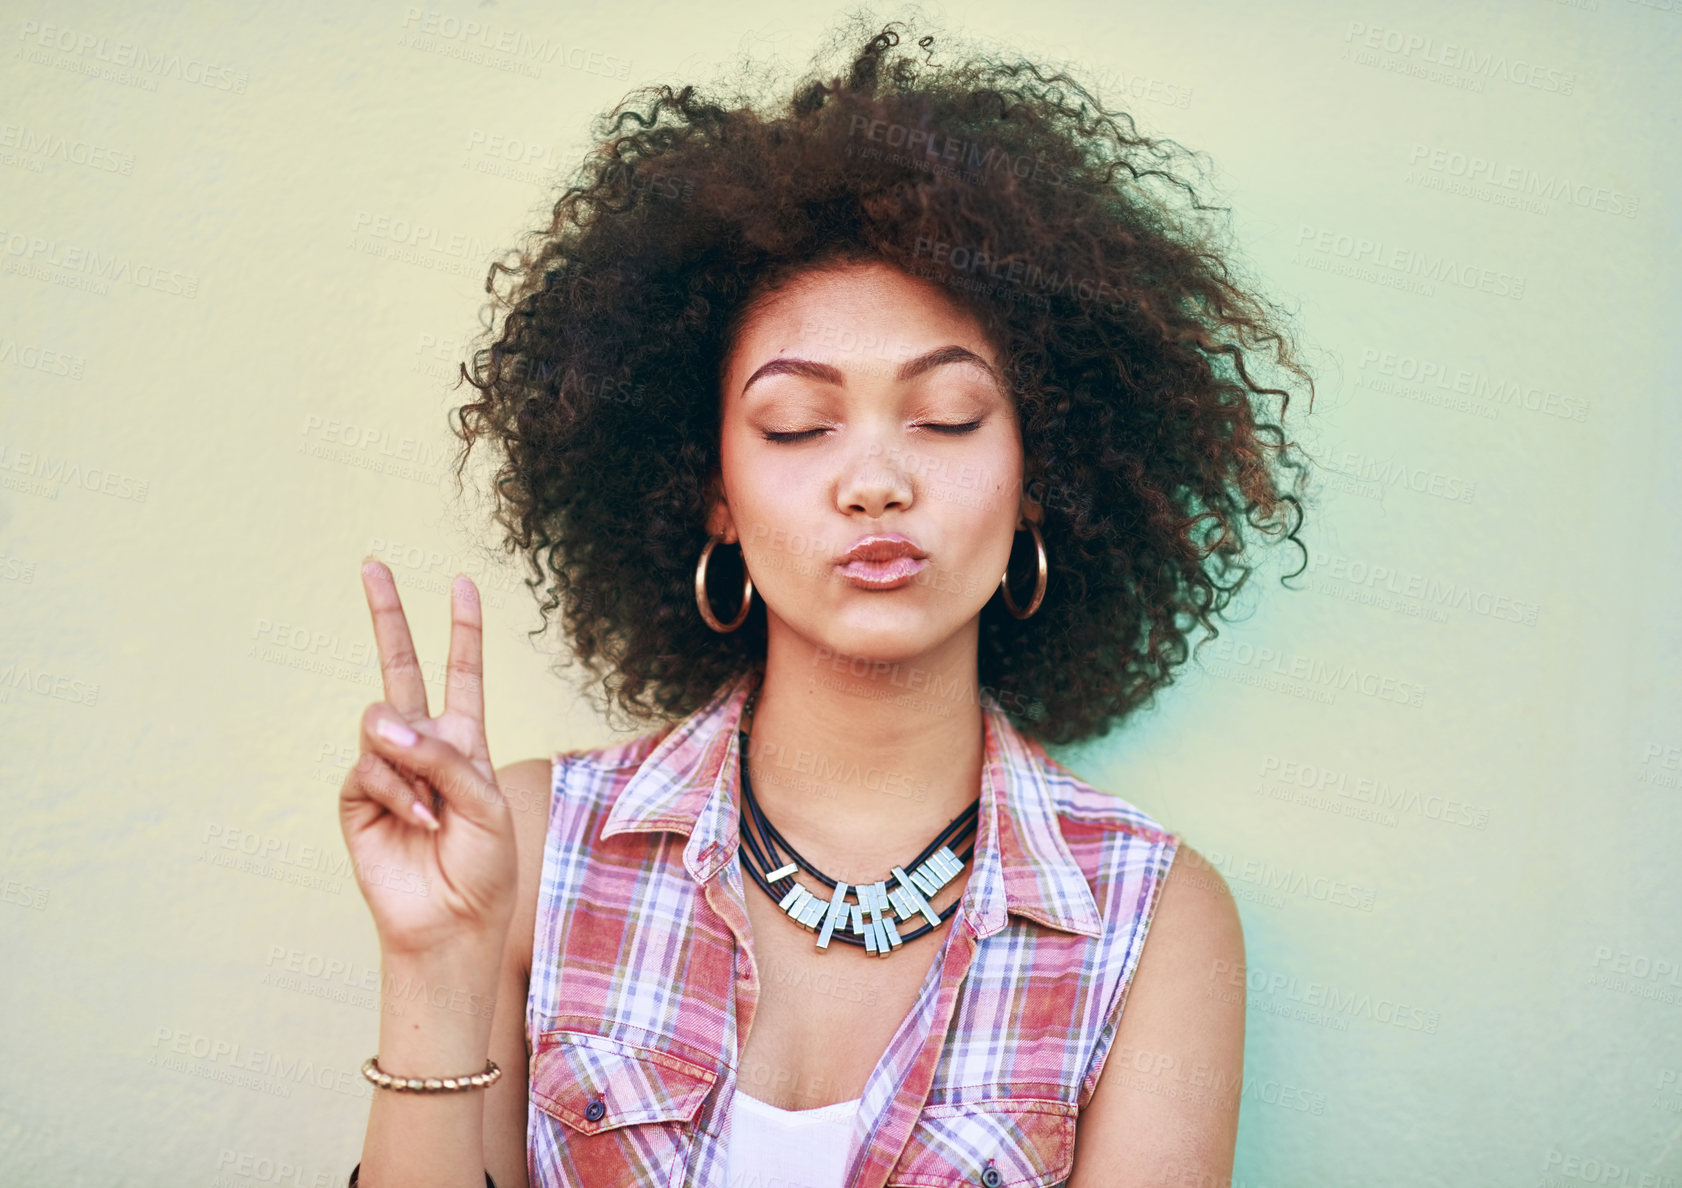 Buy stock photo Shot of an attractive young woman showing the peace sign